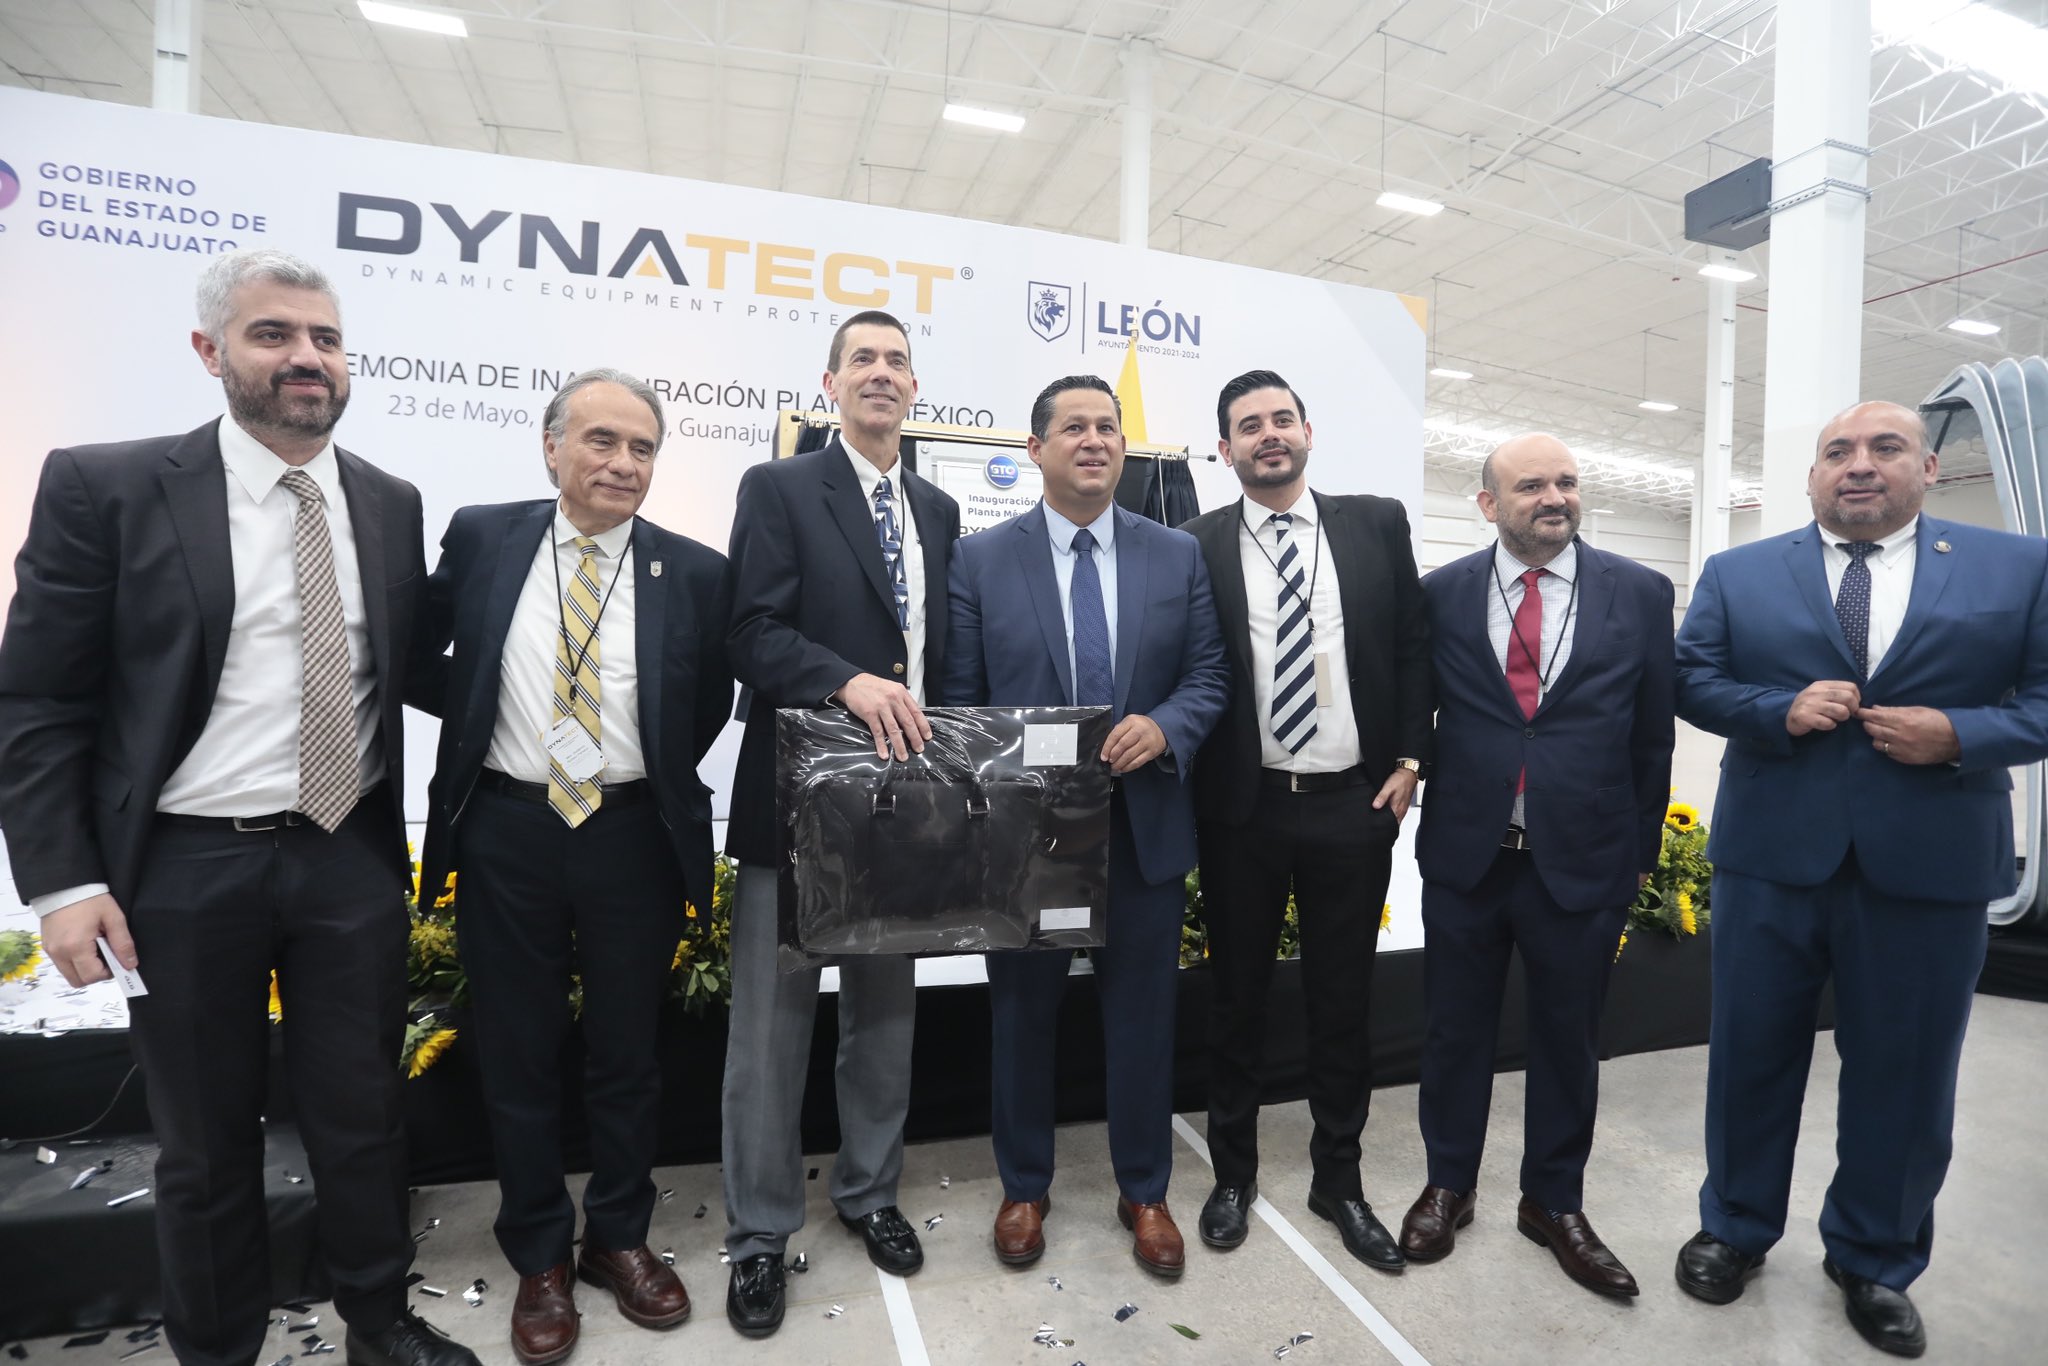 Dynatect arrives in Guanajuato with an investment of US$4 million